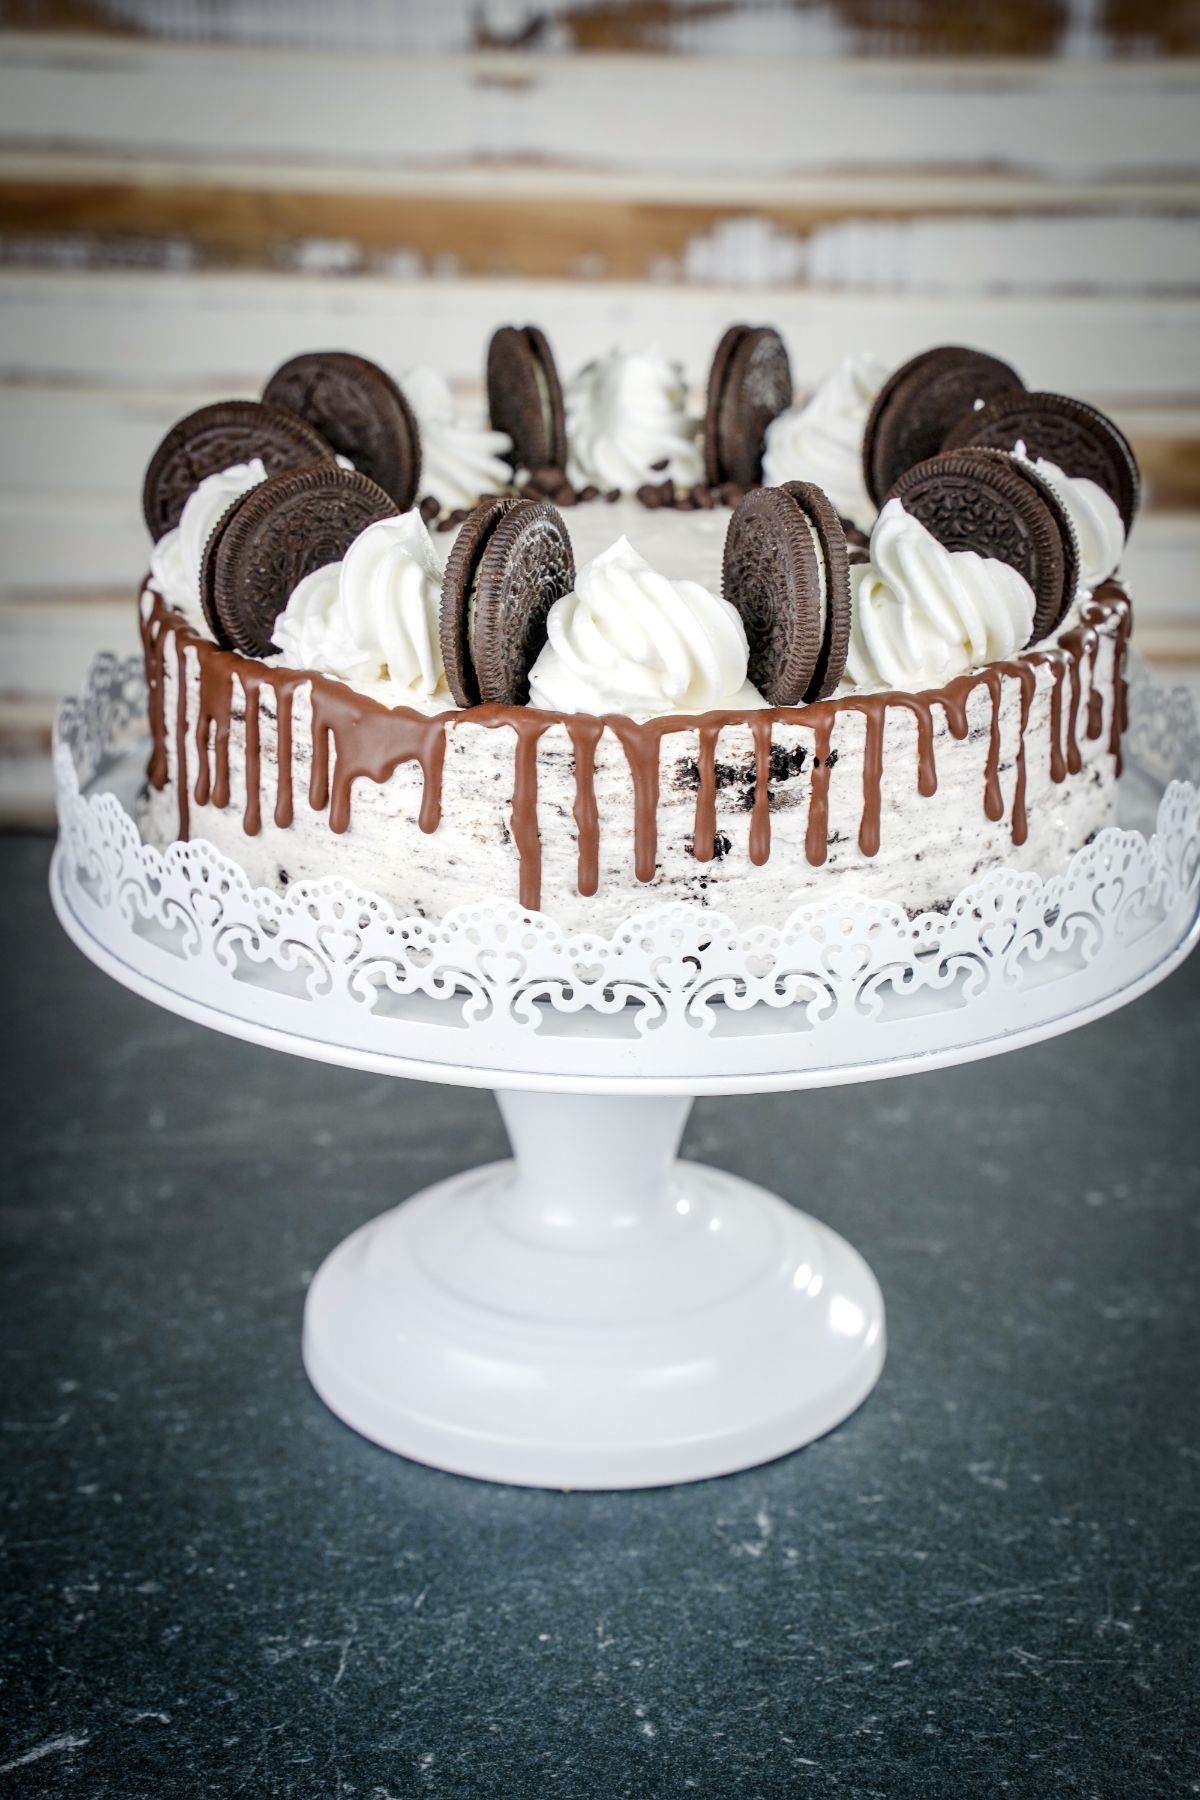 oreo icebox cake with chocolate drizzle on a cake plate